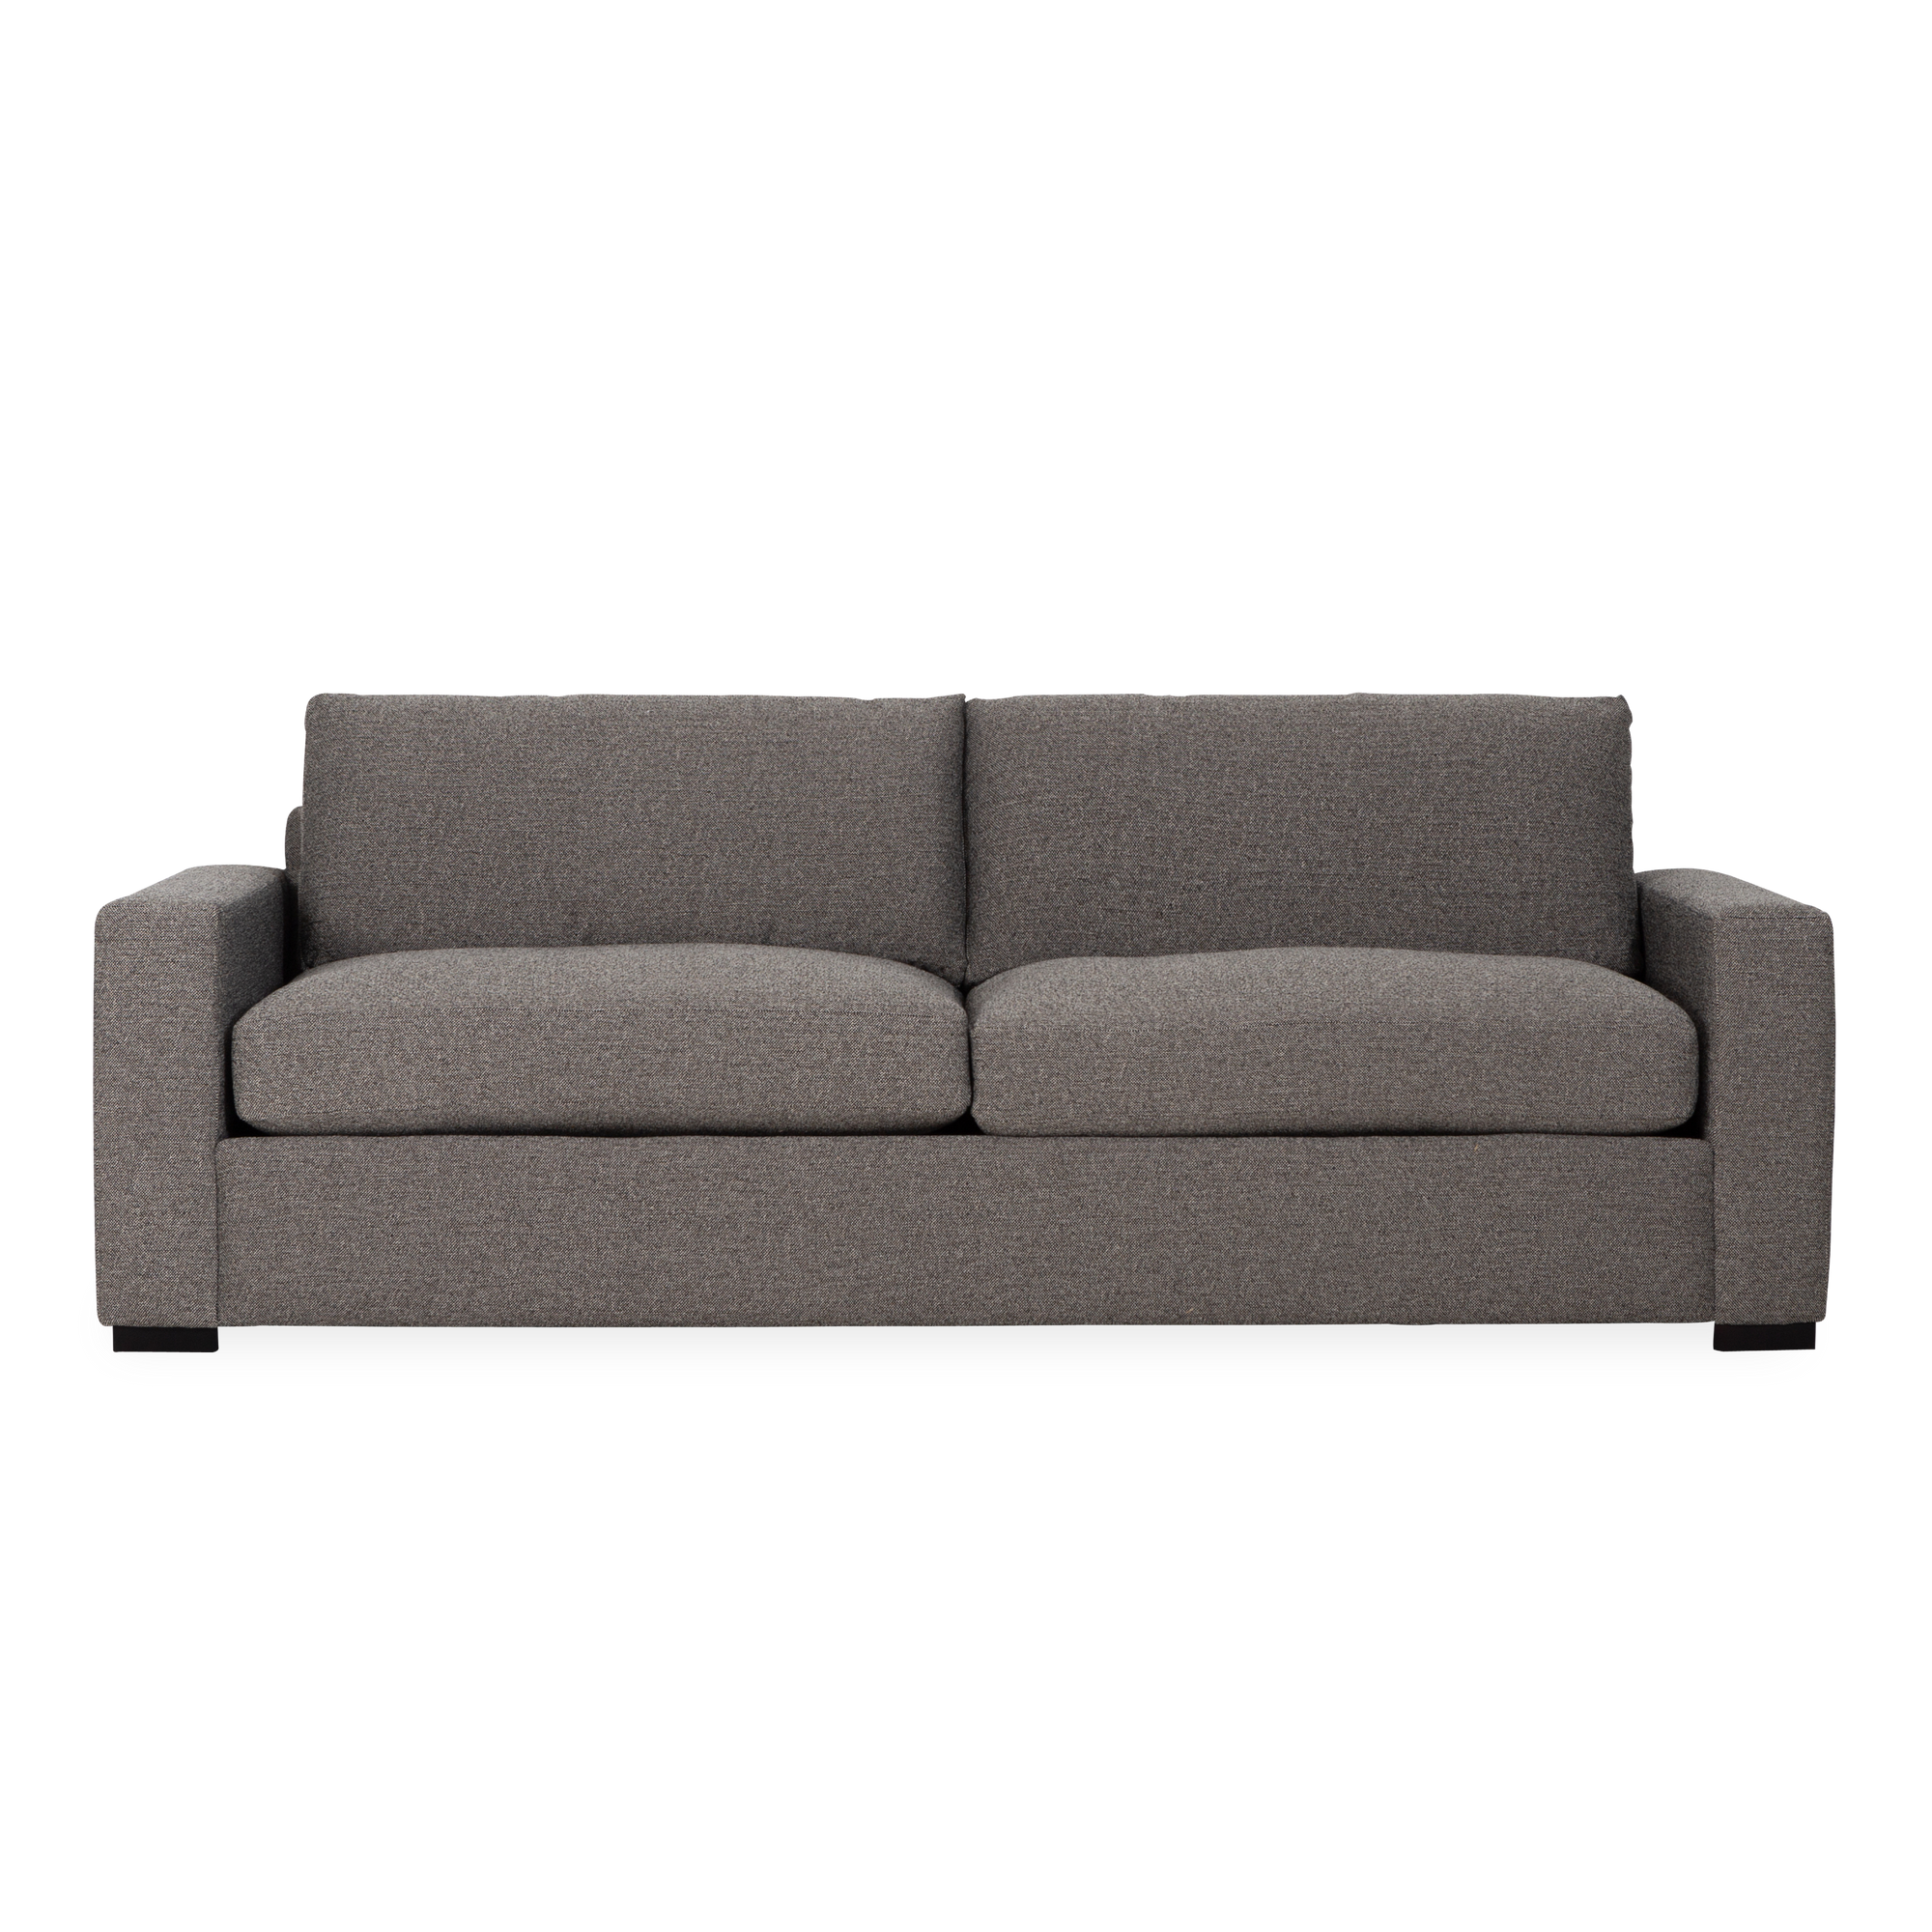 Sophisticated and Tailored, the Alton Thin Track Arm Sofa will add a great modern touch to your space.